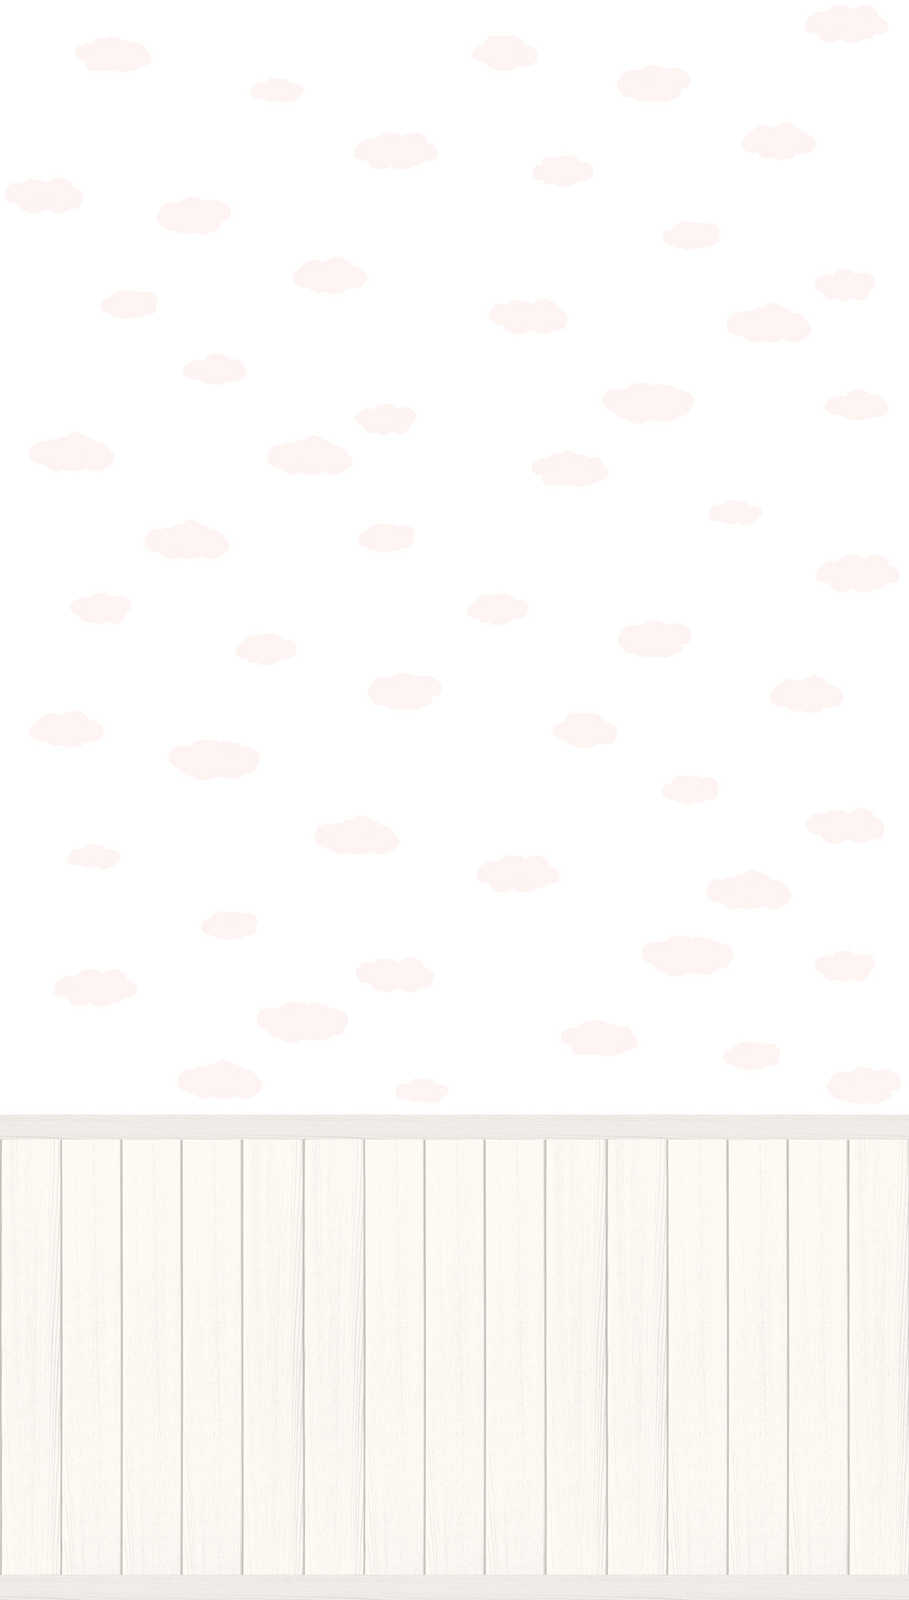             Non-woven motif wallpaper with wood-effect plinth border and cloud pattern - white, pink, grey
        